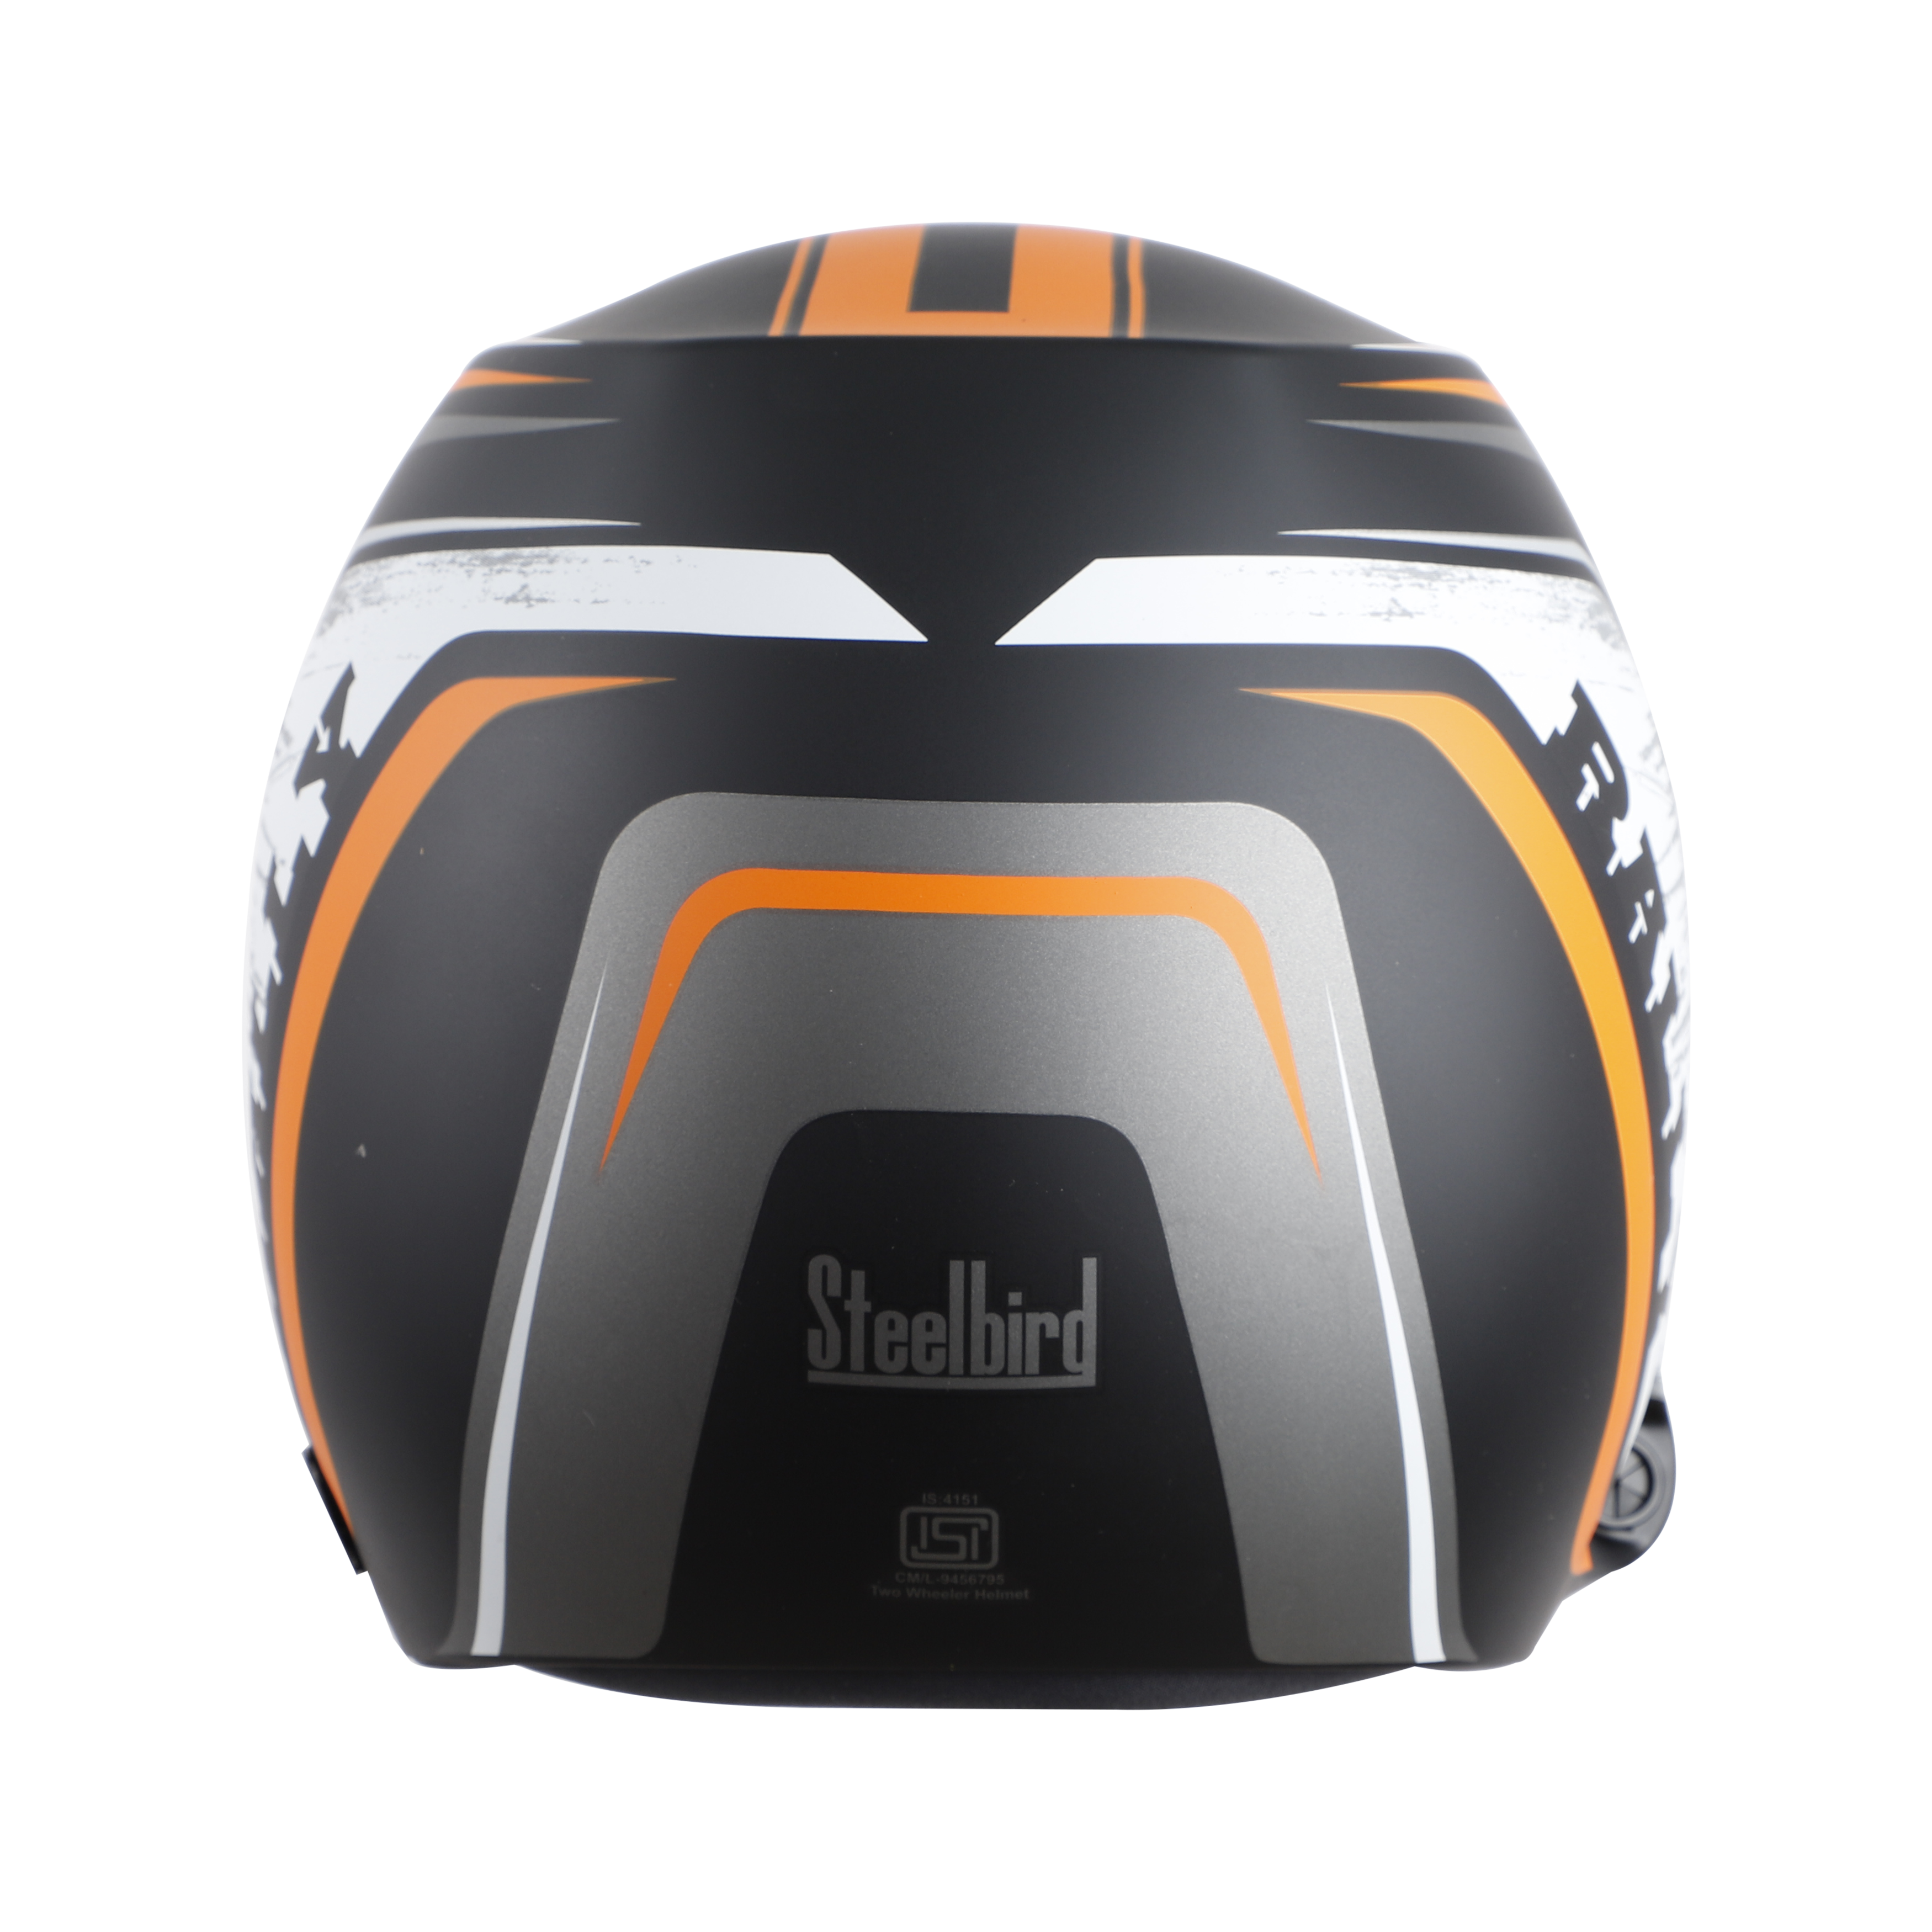 SB-51 RALLY RUT GLOSSY BLACK WITH ORANGE ( FITTED WITH CLEAR VISOR EXTRA CHROME GOLD VISOR FREE)